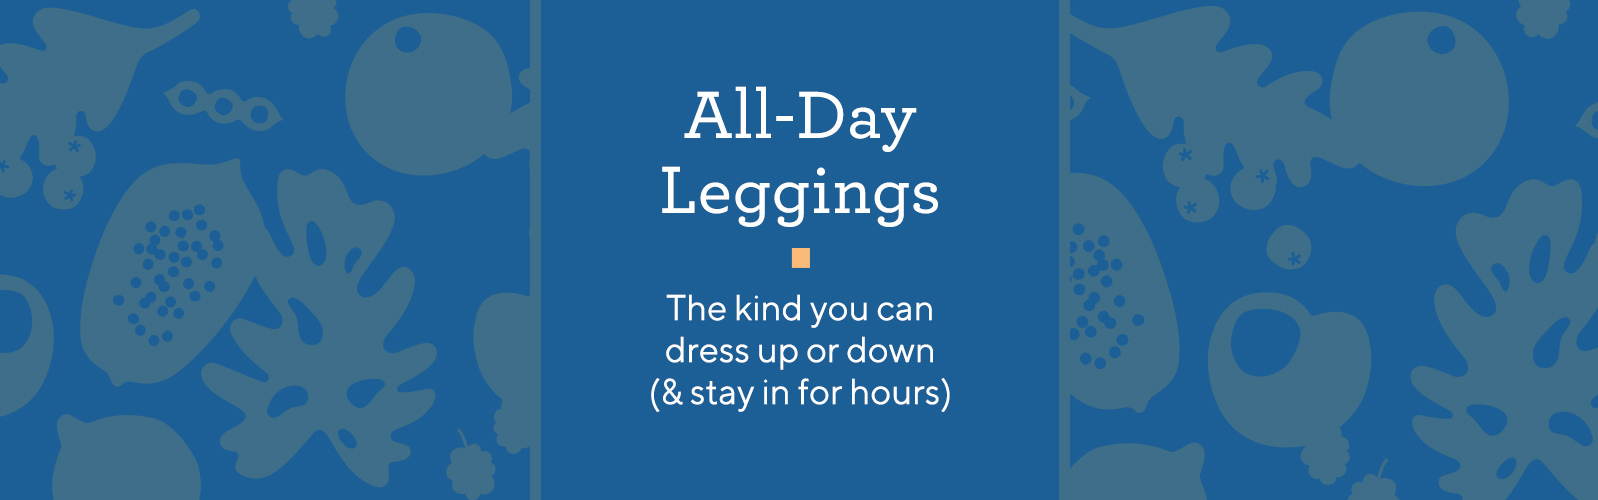 All-Day Leggings.  The kind you can dress up or down (& stay in for hours).